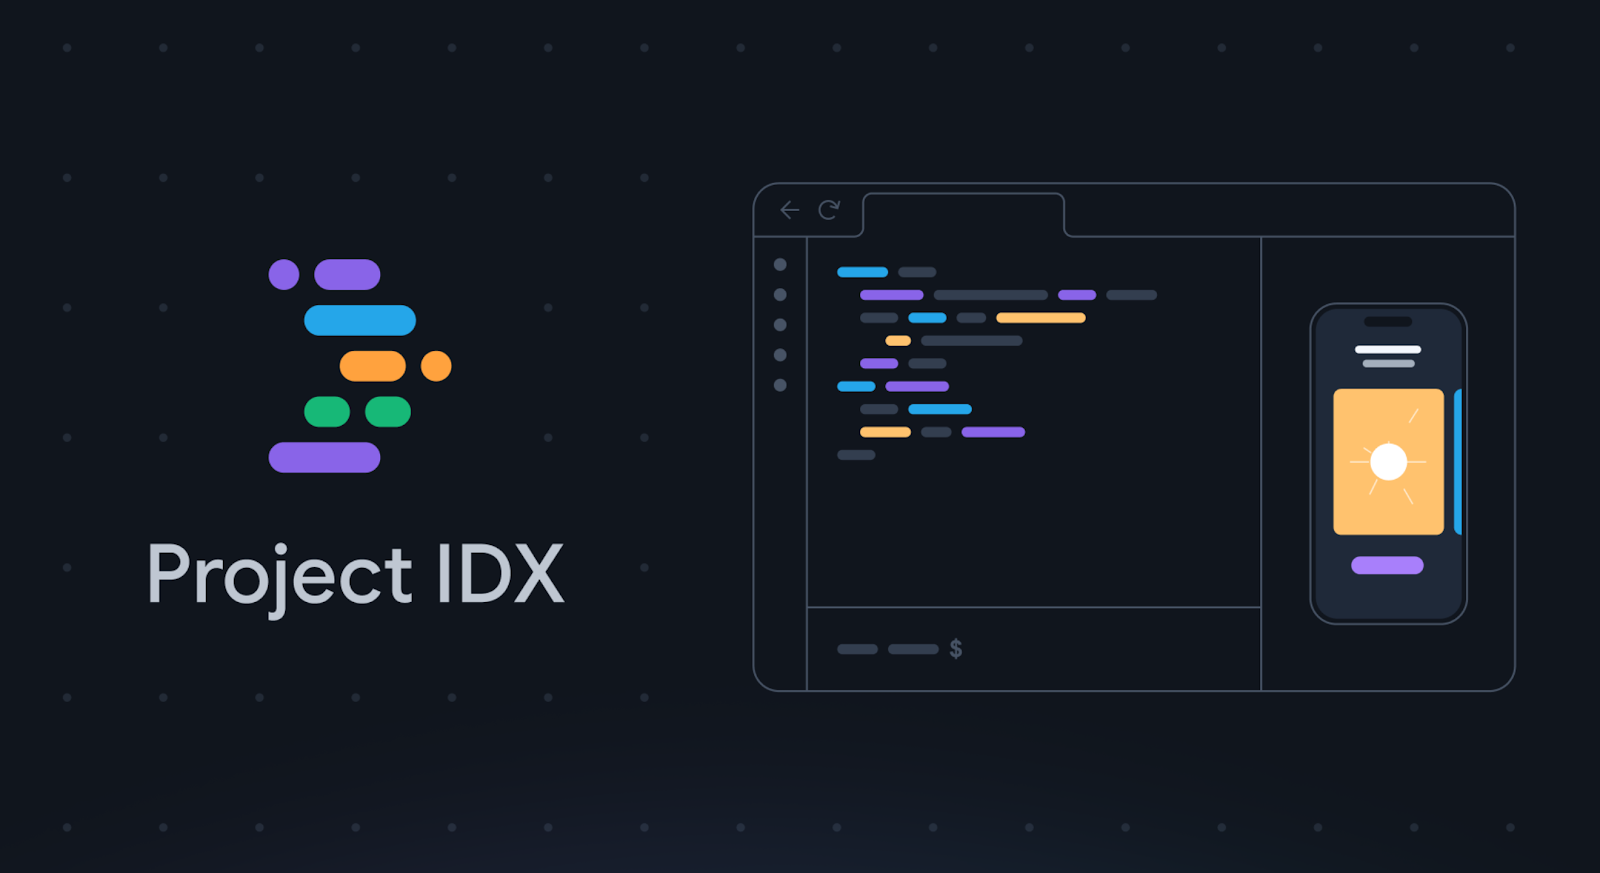 Wide header image showcasing Project IDX interface or a related visual